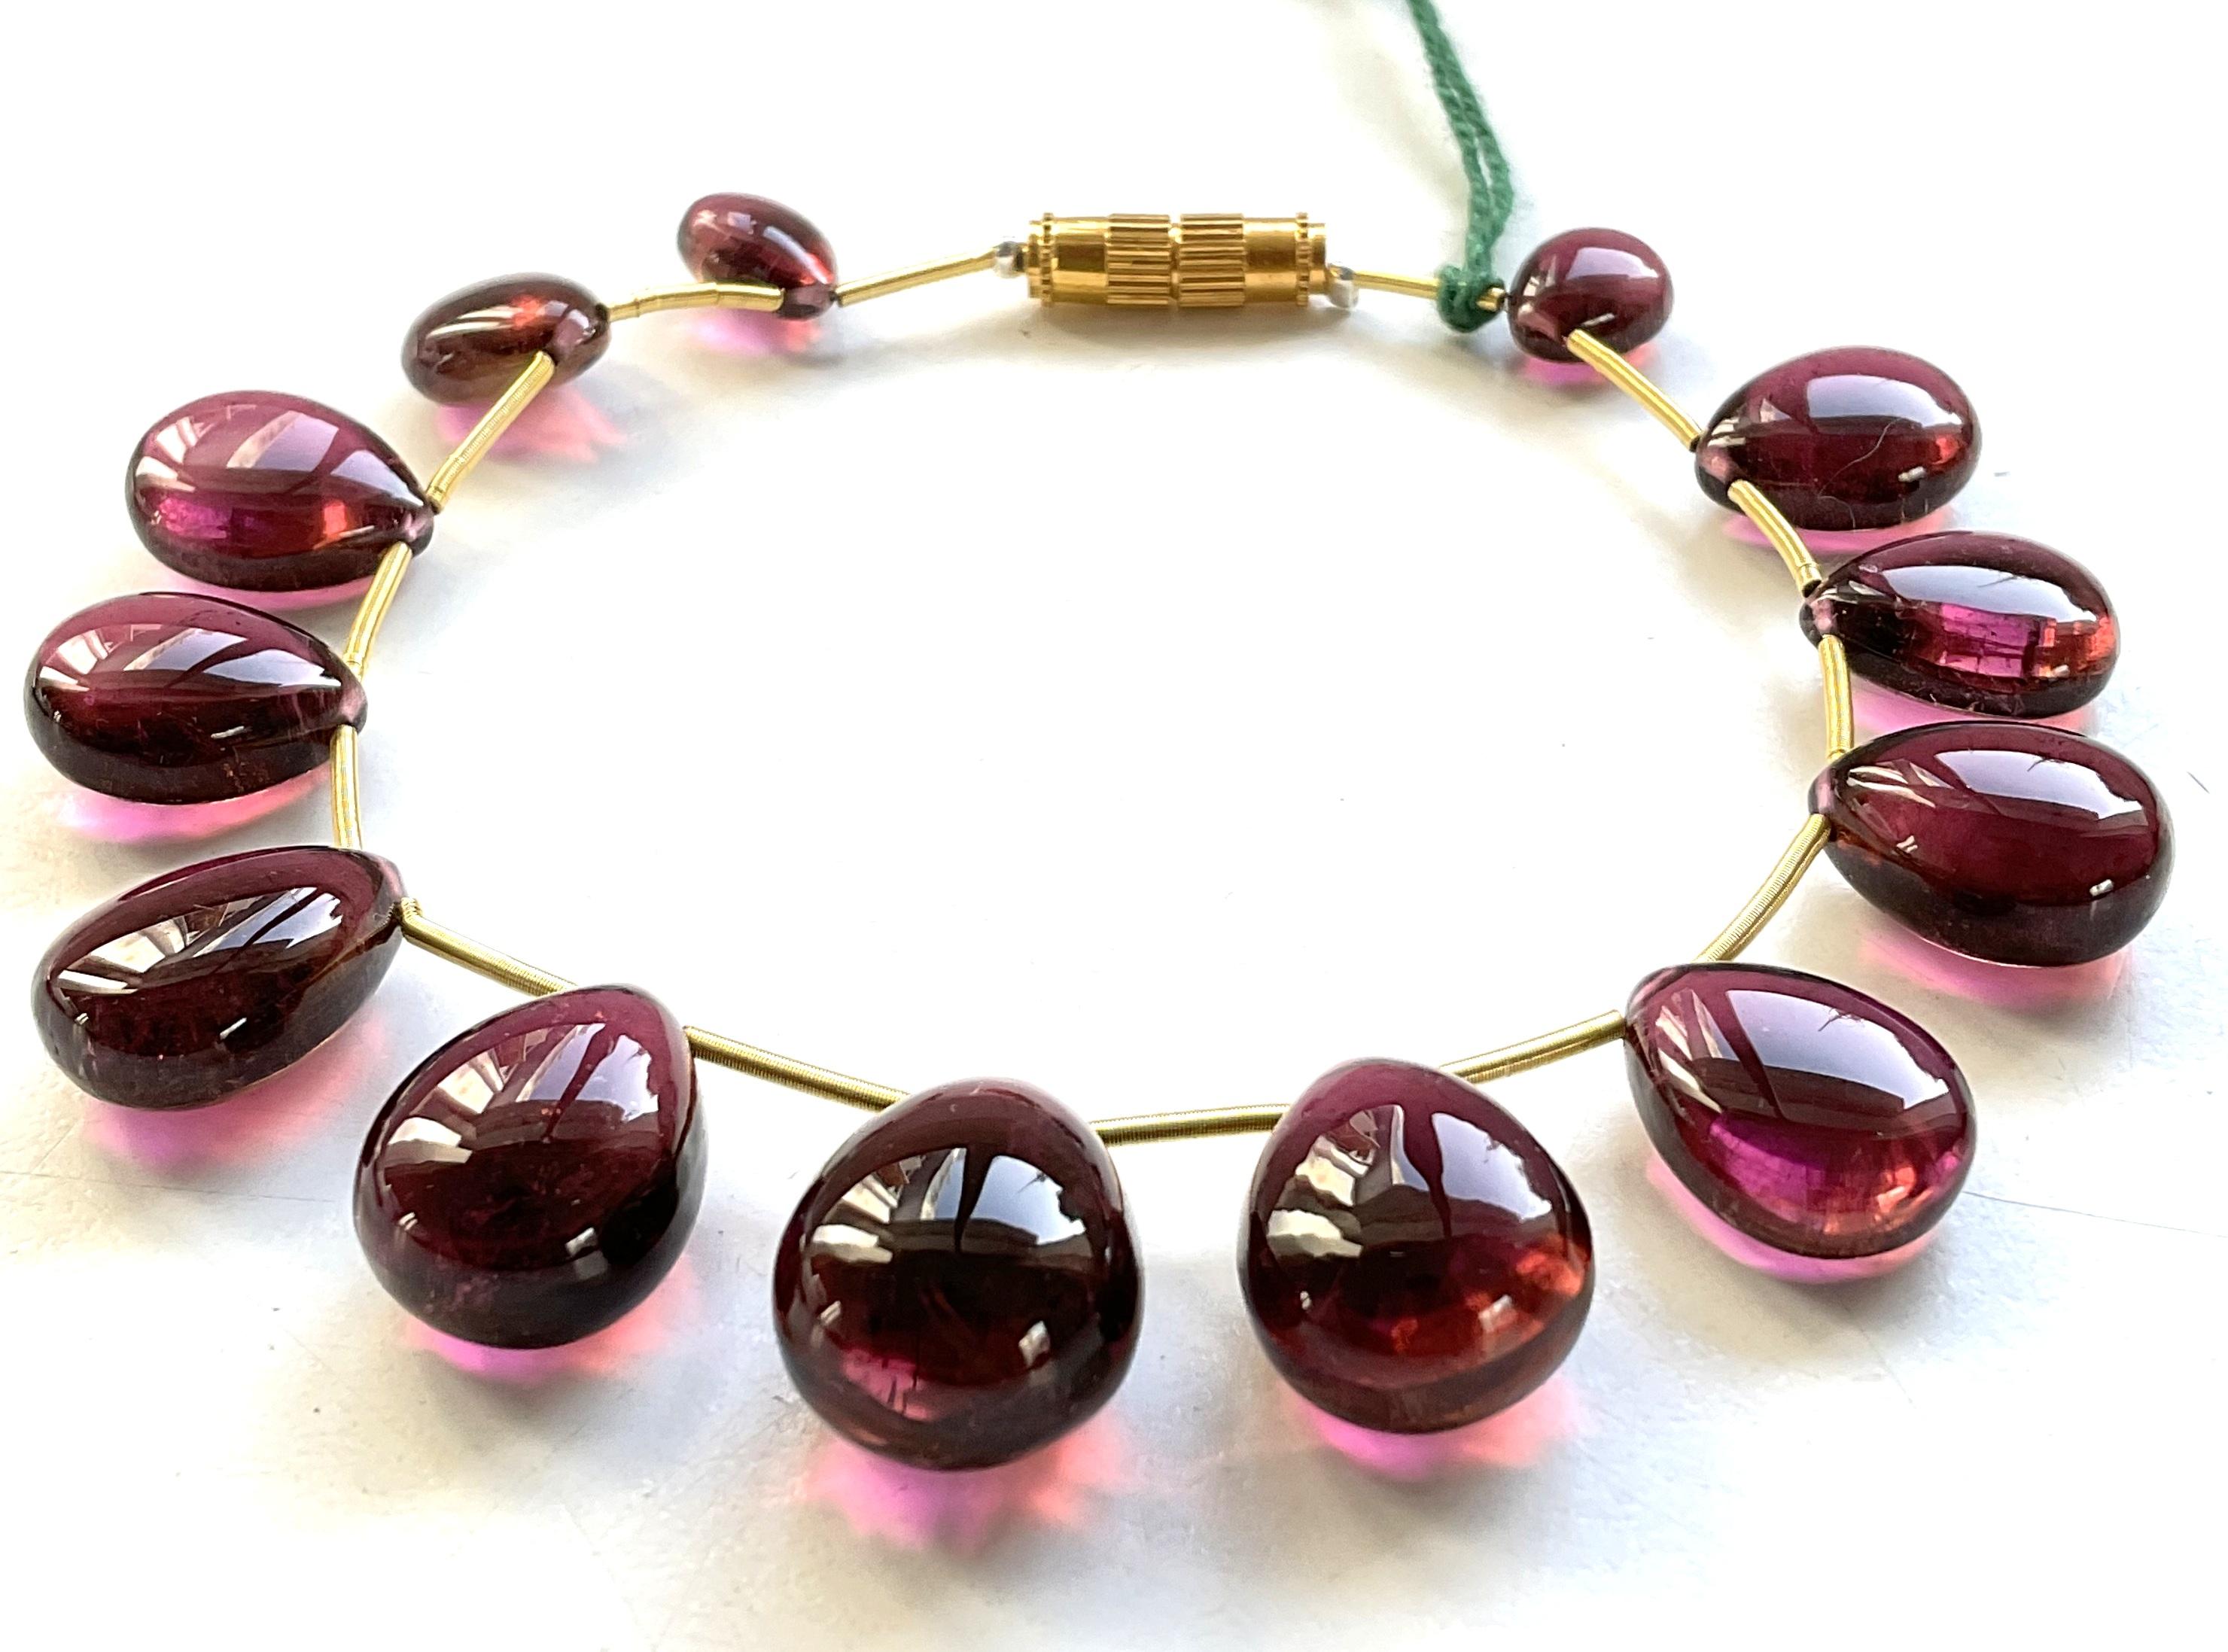 110.20 Carats Rubellite Layout Drops Top Quality For Fine Jewelry Natural Gem For Sale 1